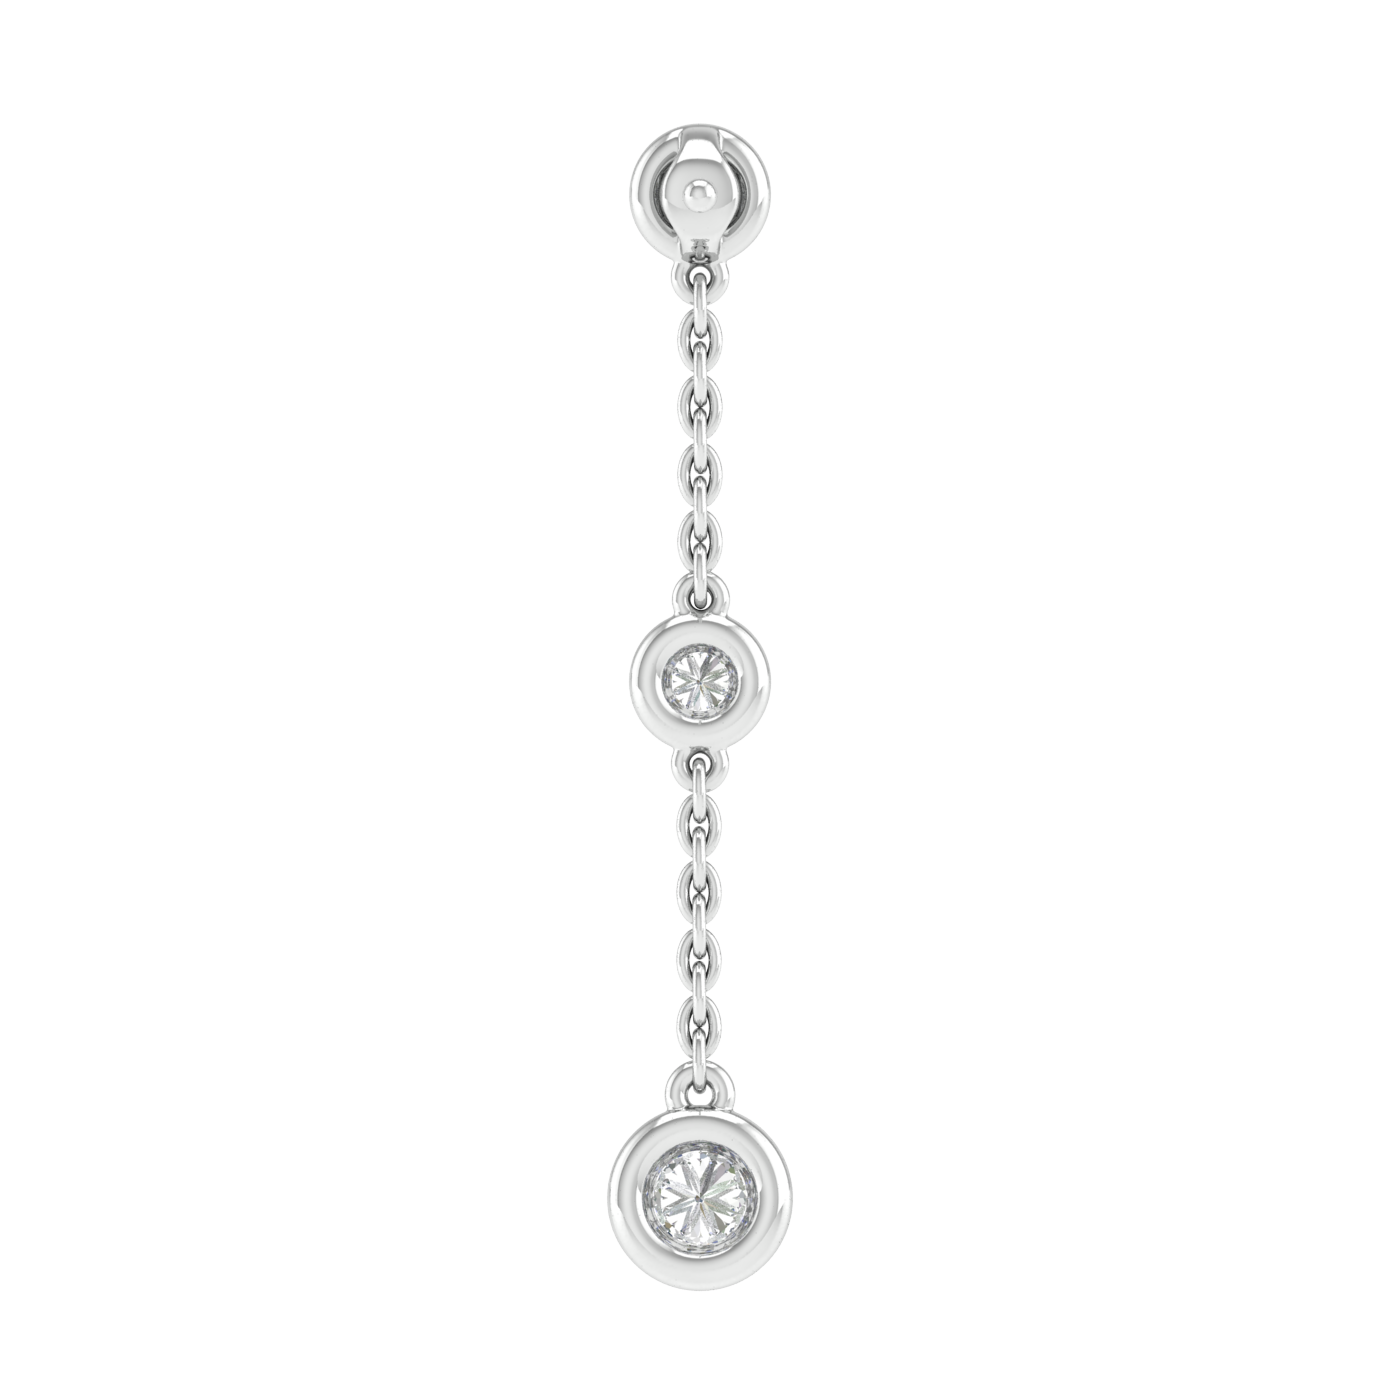 Diamond Chain Earrings with 0.25ct Diamonds in 9K White Gold